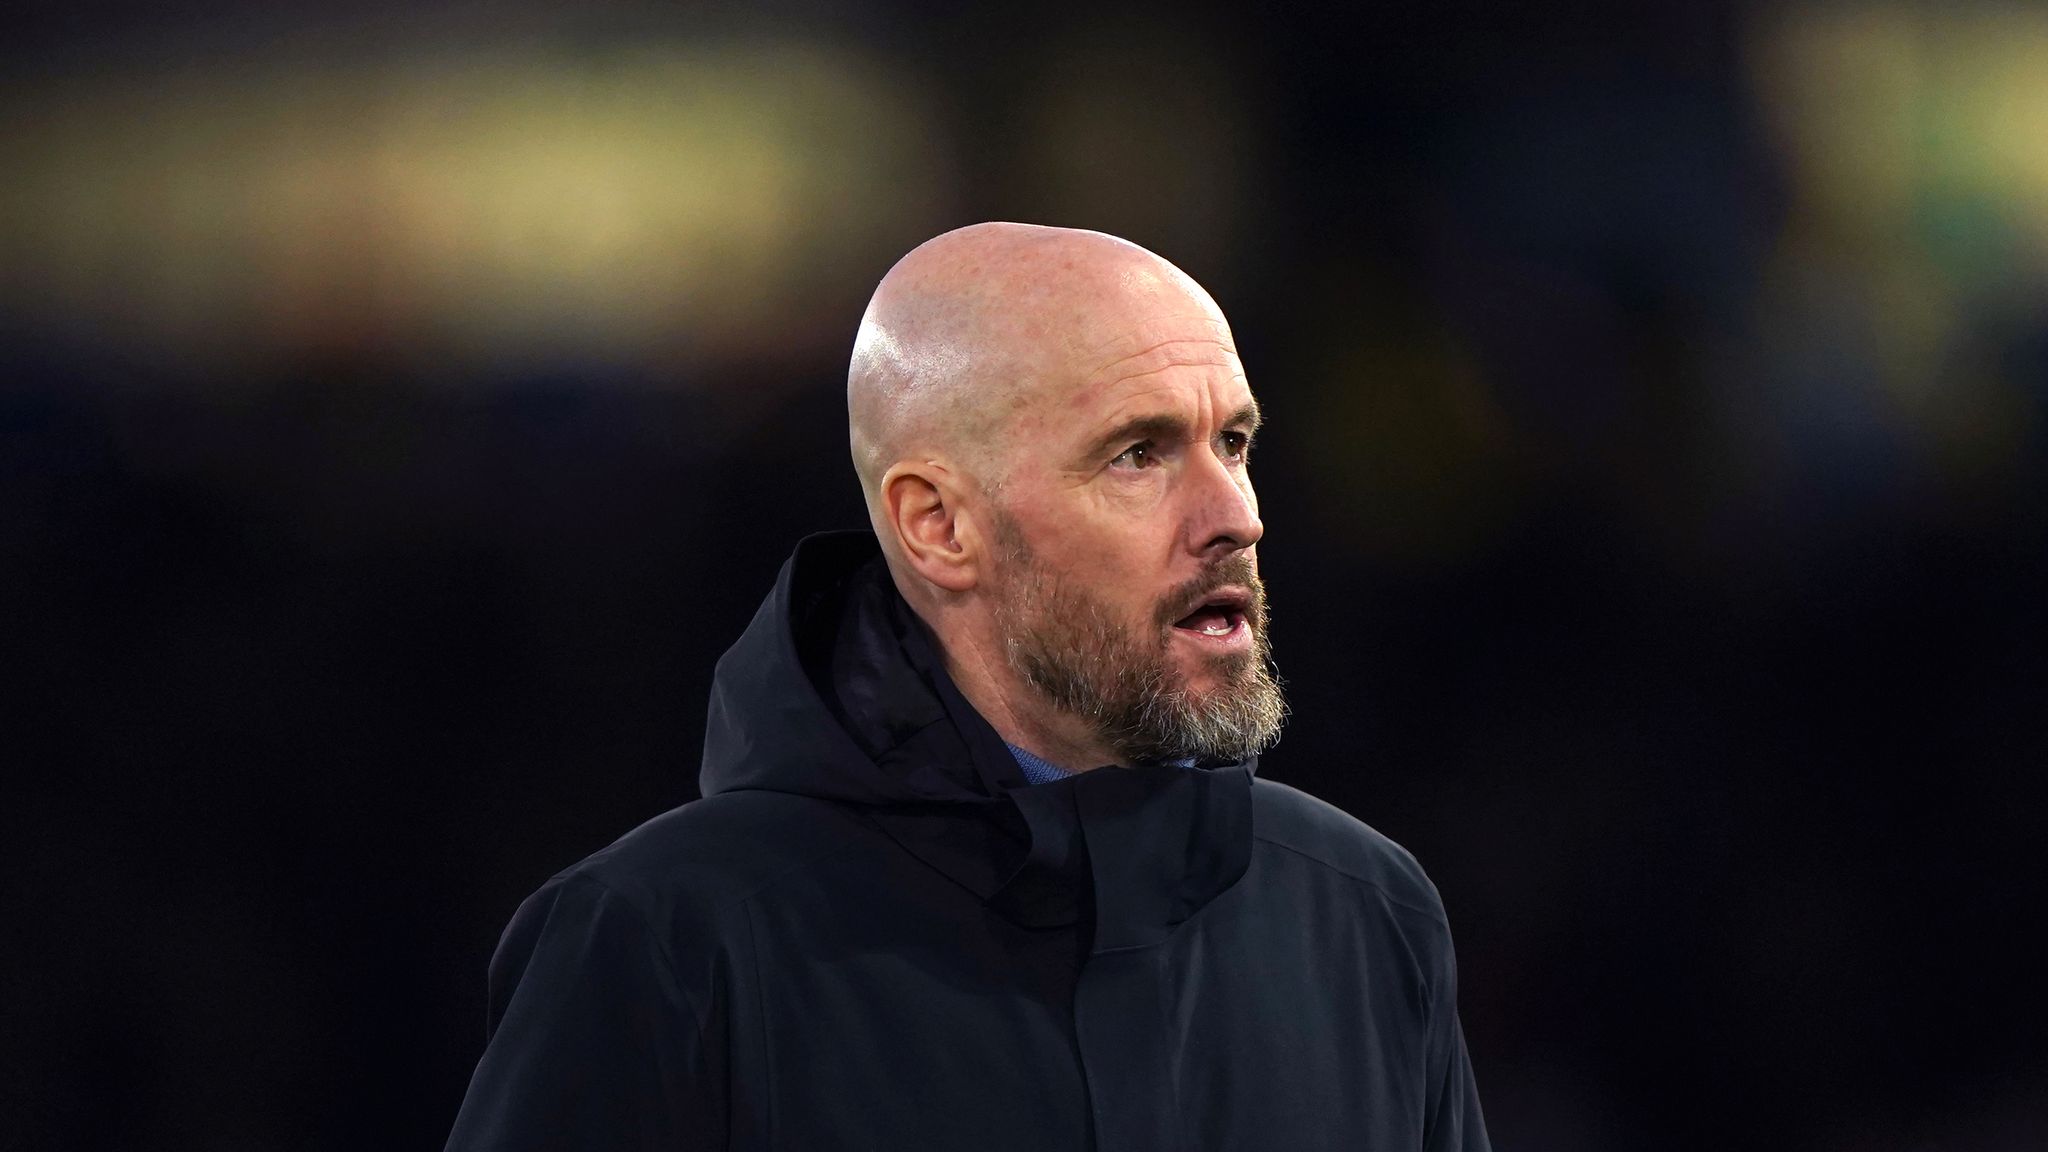 Ten Hag warned to think twice over dumping £70m Man Utd star despite  youngster's meteoric rise